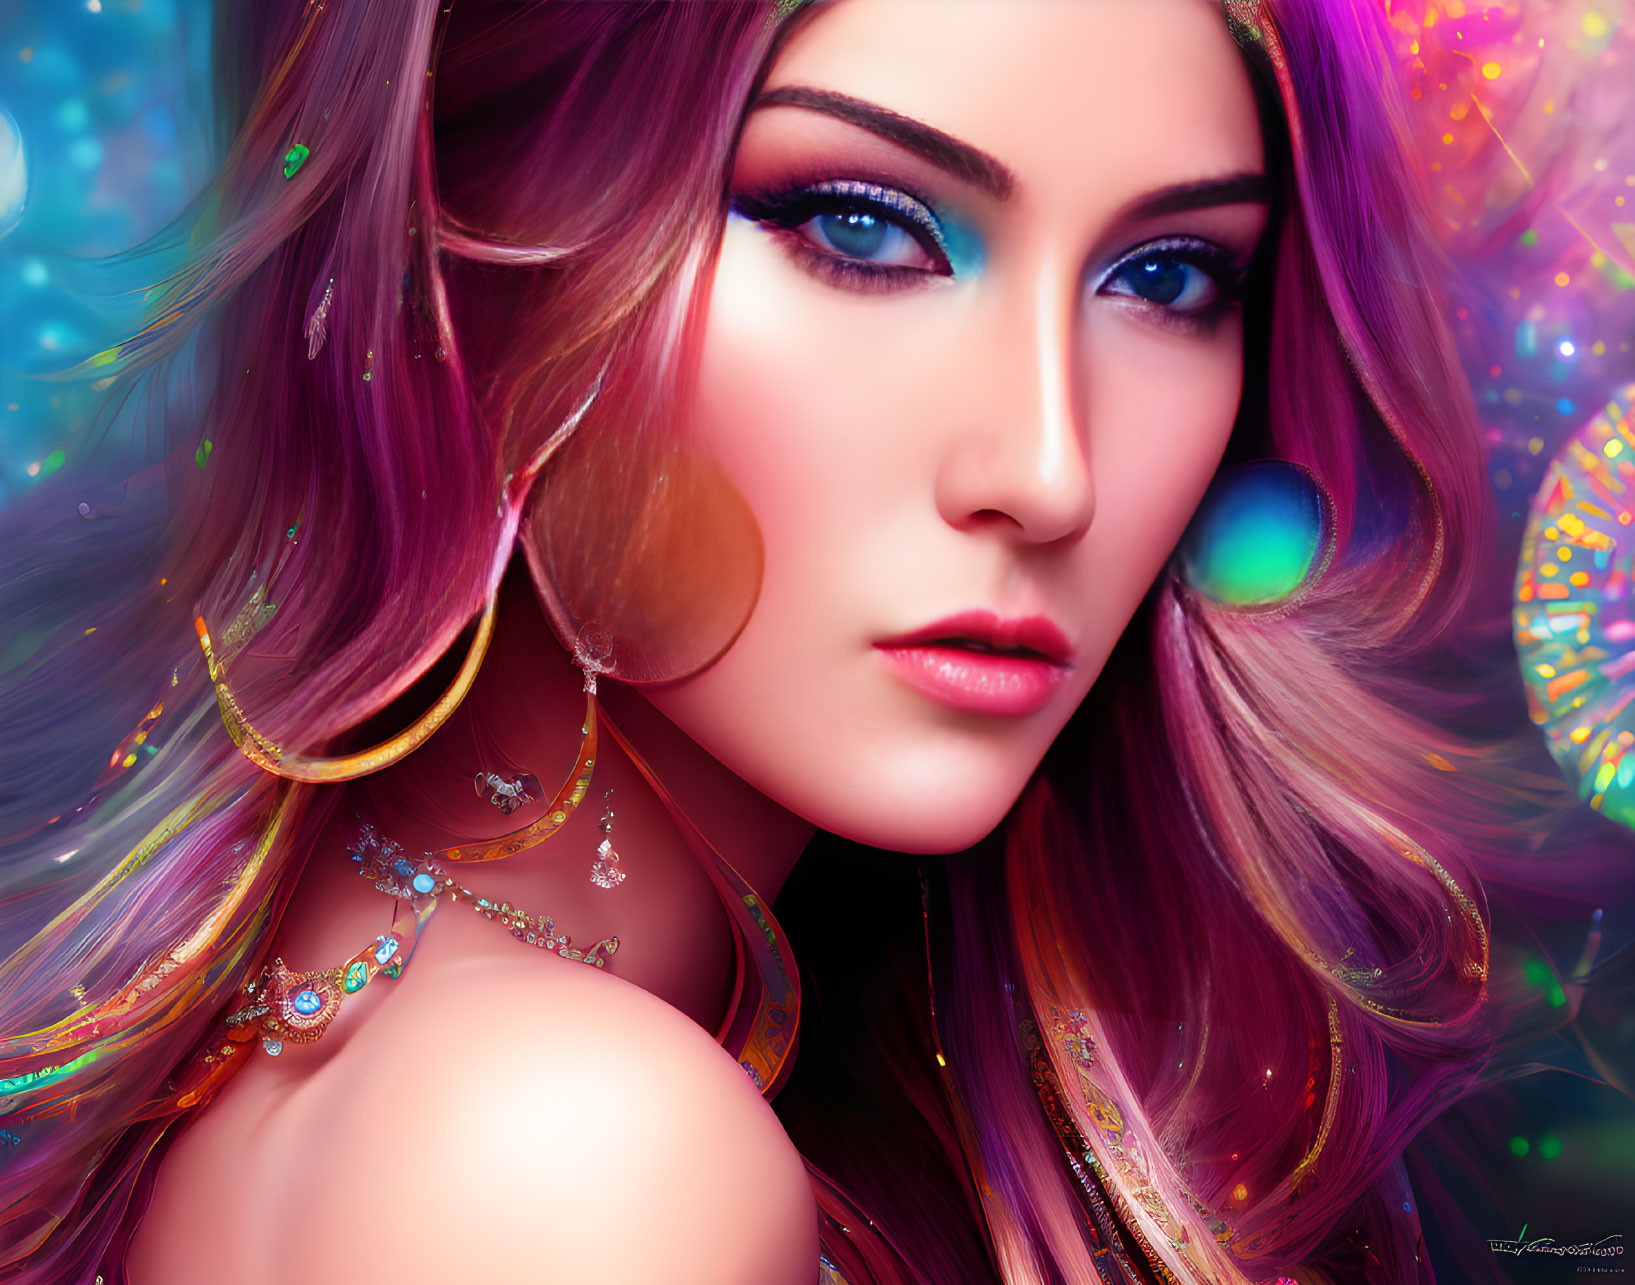 Vivid digital artwork: Woman with blue eyes, flowing hair, and jewelry